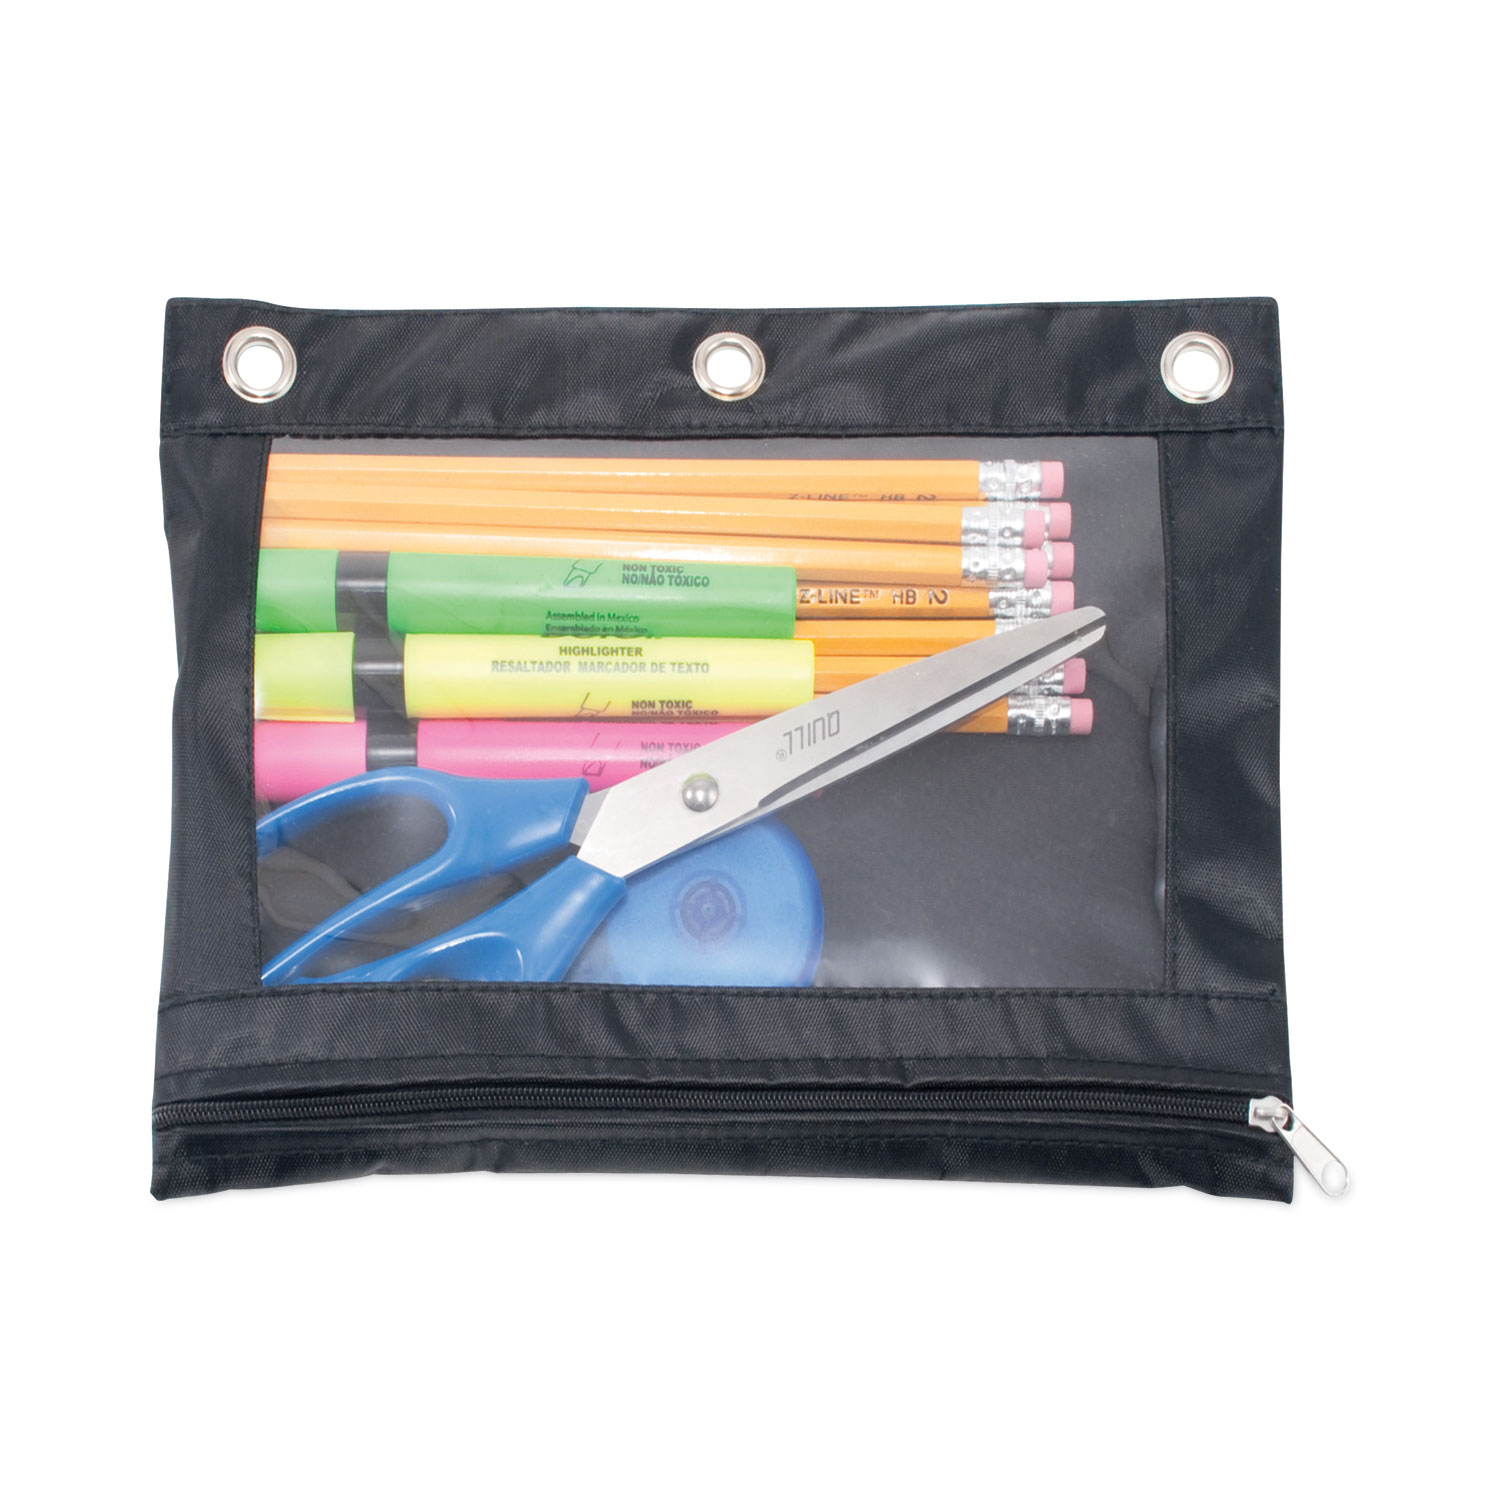 Design May Vary Inkology Laser Binder Pouches with Mesh Pocket Inkology Inc. 04886 12 Pouches per Pack 